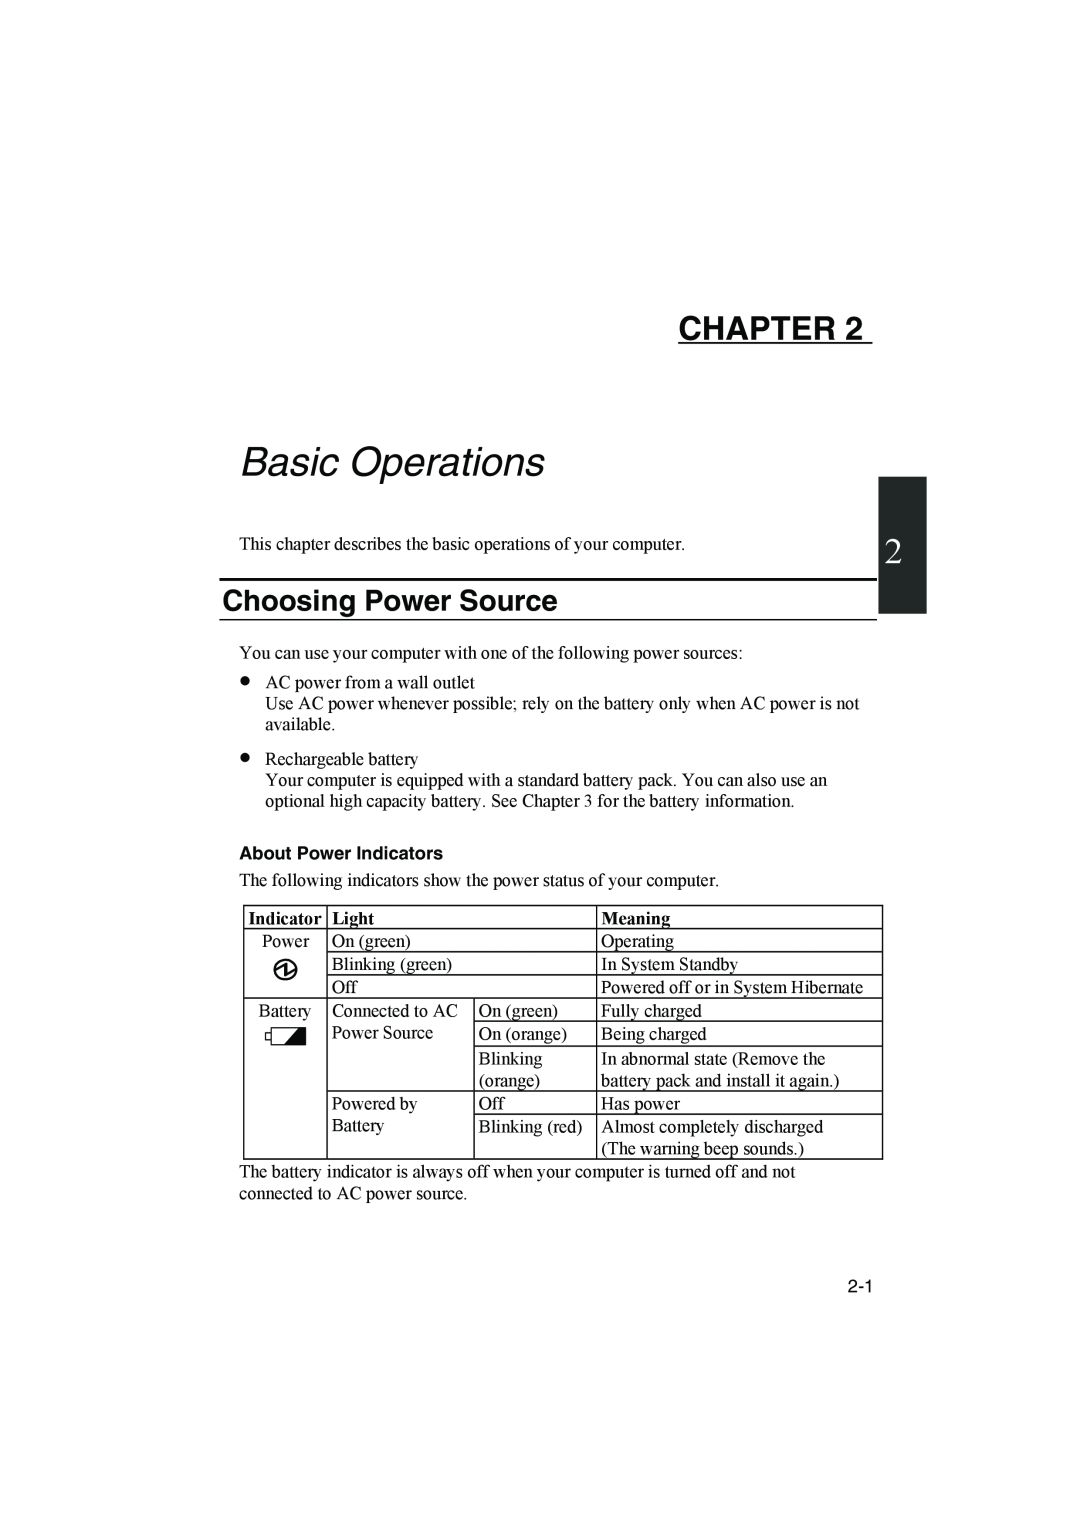 Sharp PC-MM1 manual Basic Operations, Choosing Power Source, About Power Indicators, Light, Meaning, Chapter 